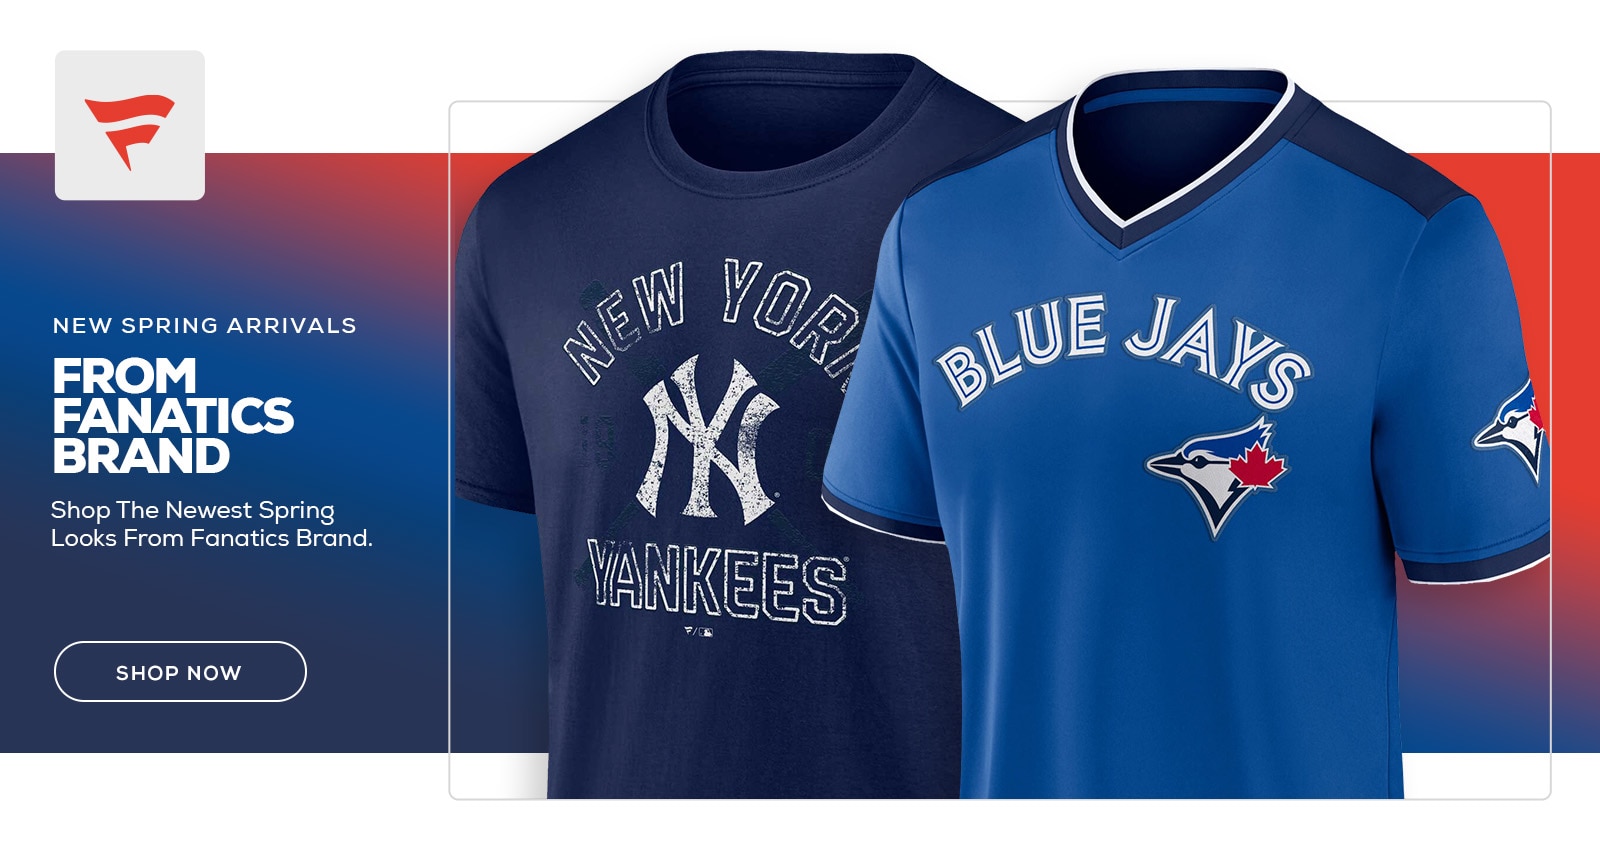 NEW SPRING ARRIVALS FROM FANATICS BRAND. Shop The Newest Spring Looks From Fanatics Brand. 